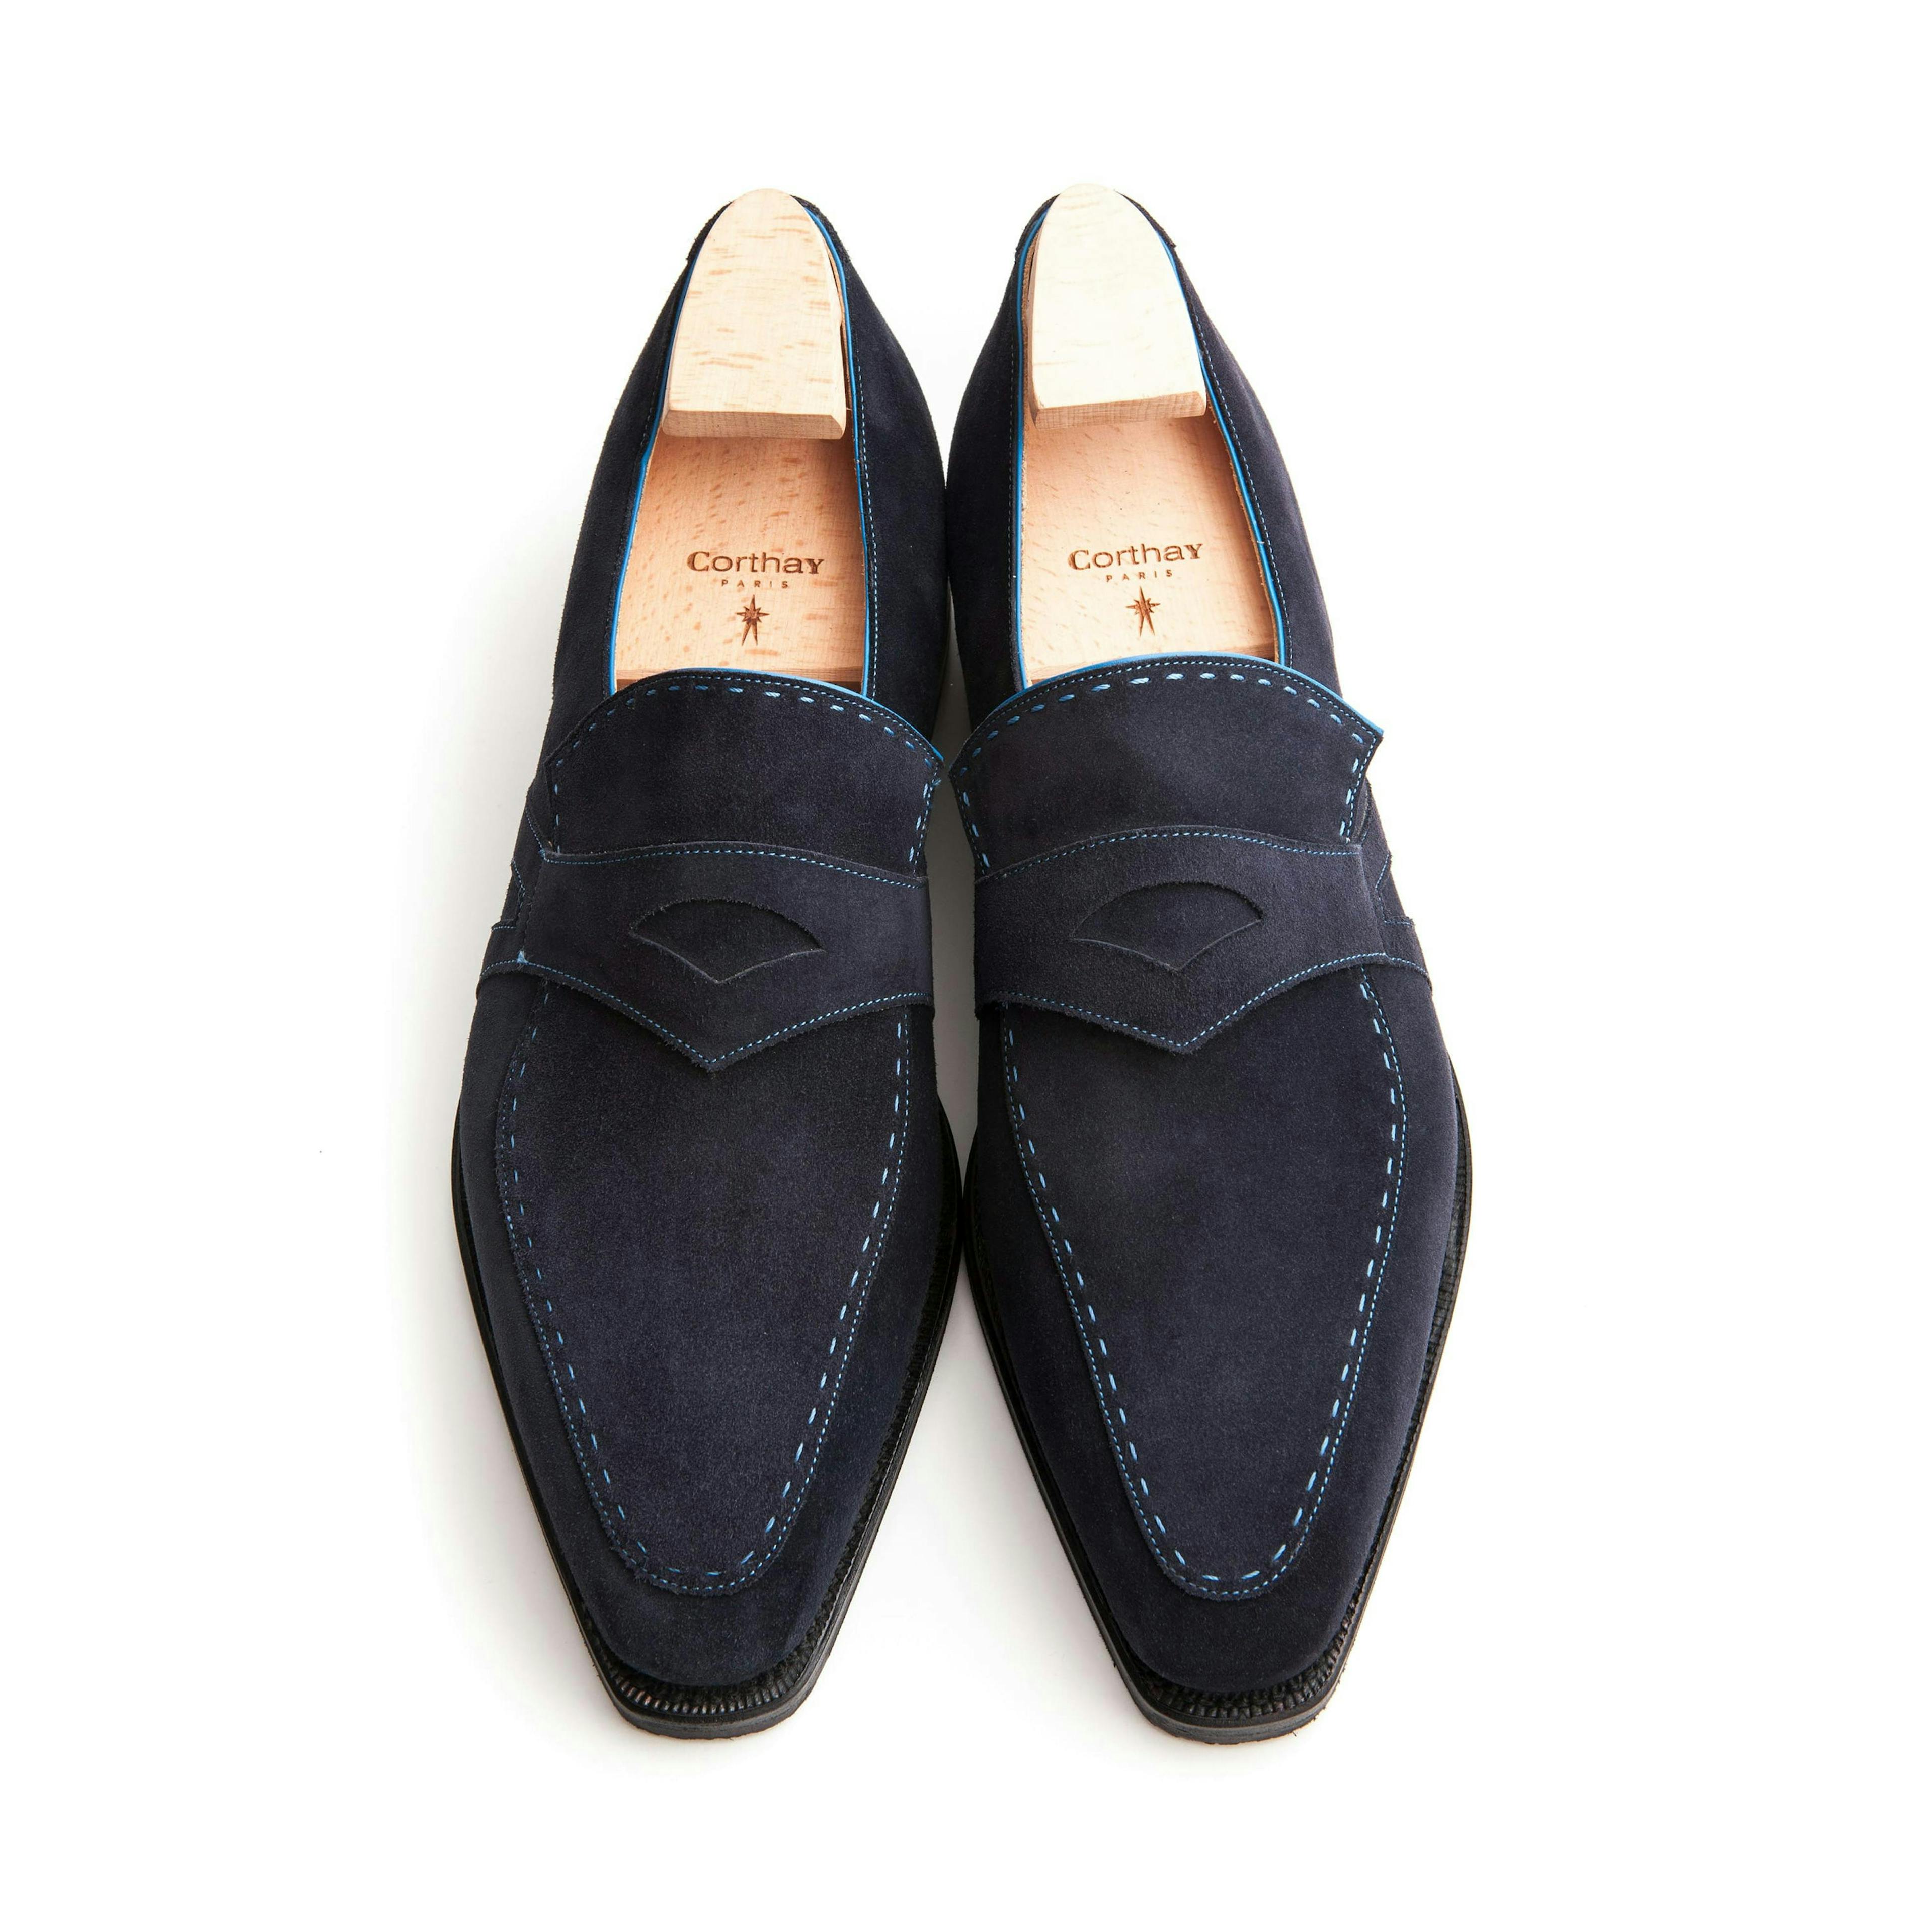 Top view of a Corthay Rascaille in navy suede.